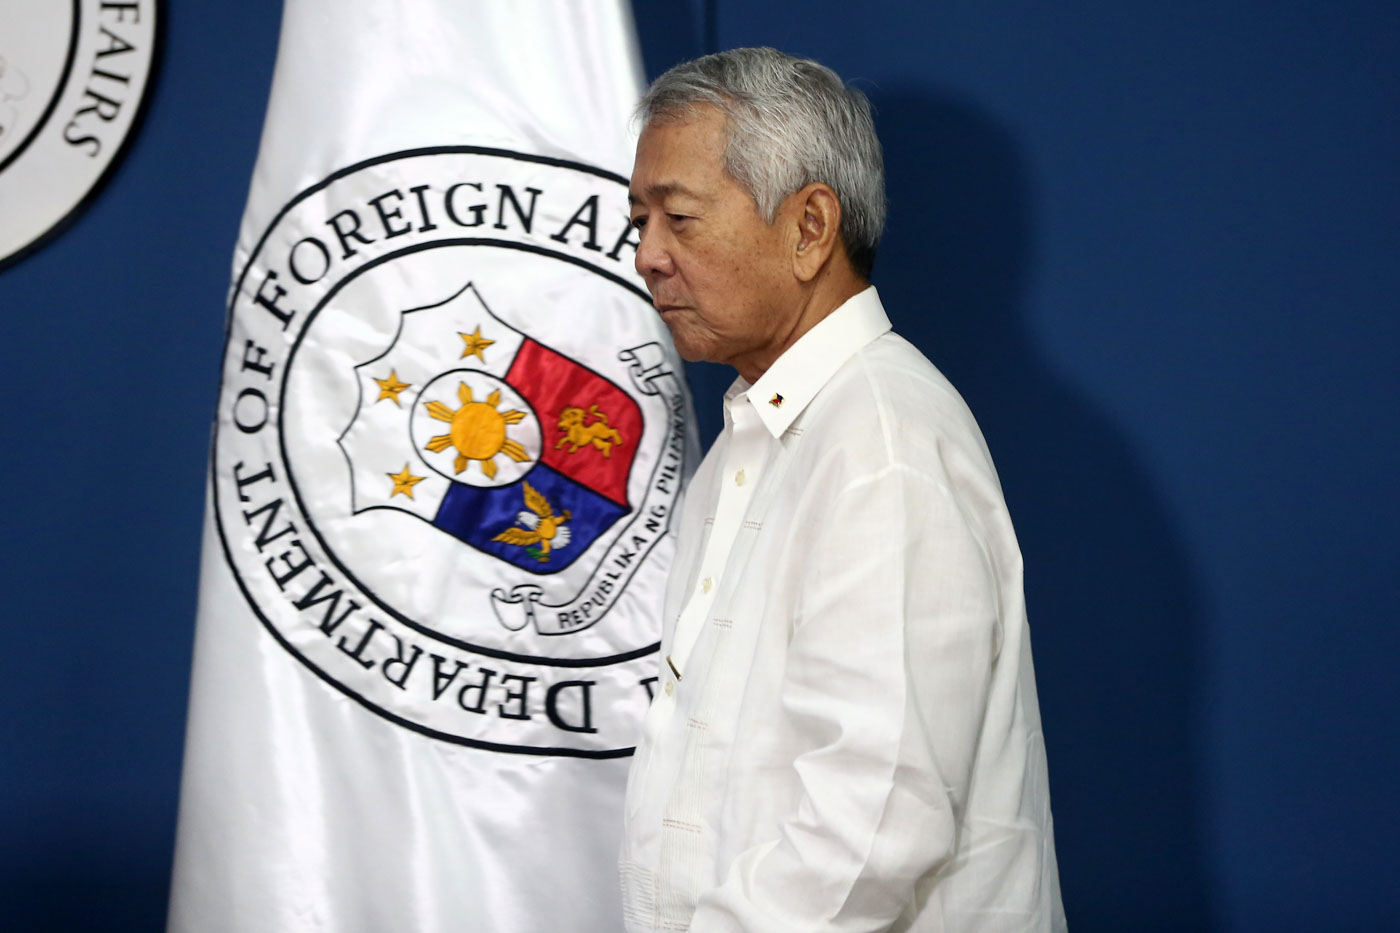 INTERNATIONAL CASE. Philippine Foreign Affairs secretary Perfecto Yasay delivers a brief statement on the award of the Arbitral Tribunal constituted by the UN Convention on the Law of the Sea on the disputed West Philippine Sea during a press conference at the DFA head office in Pasay City on Tuesday, July 12, 2016. Photo by Ben Nabong/Rappler 